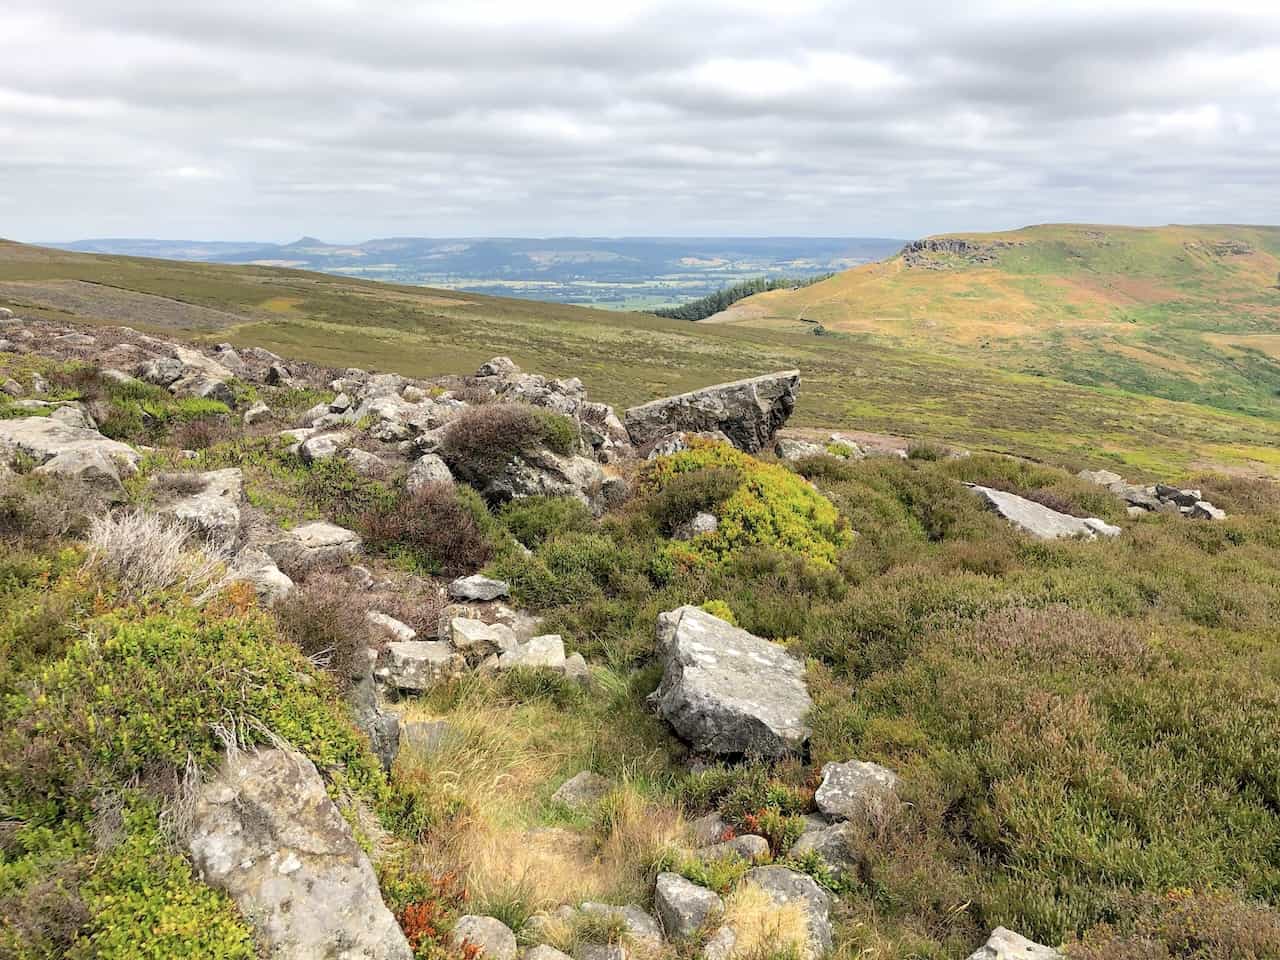 Gazing across to the Wainstones from the vantage point of Cold Moor offers a breathtaking view.